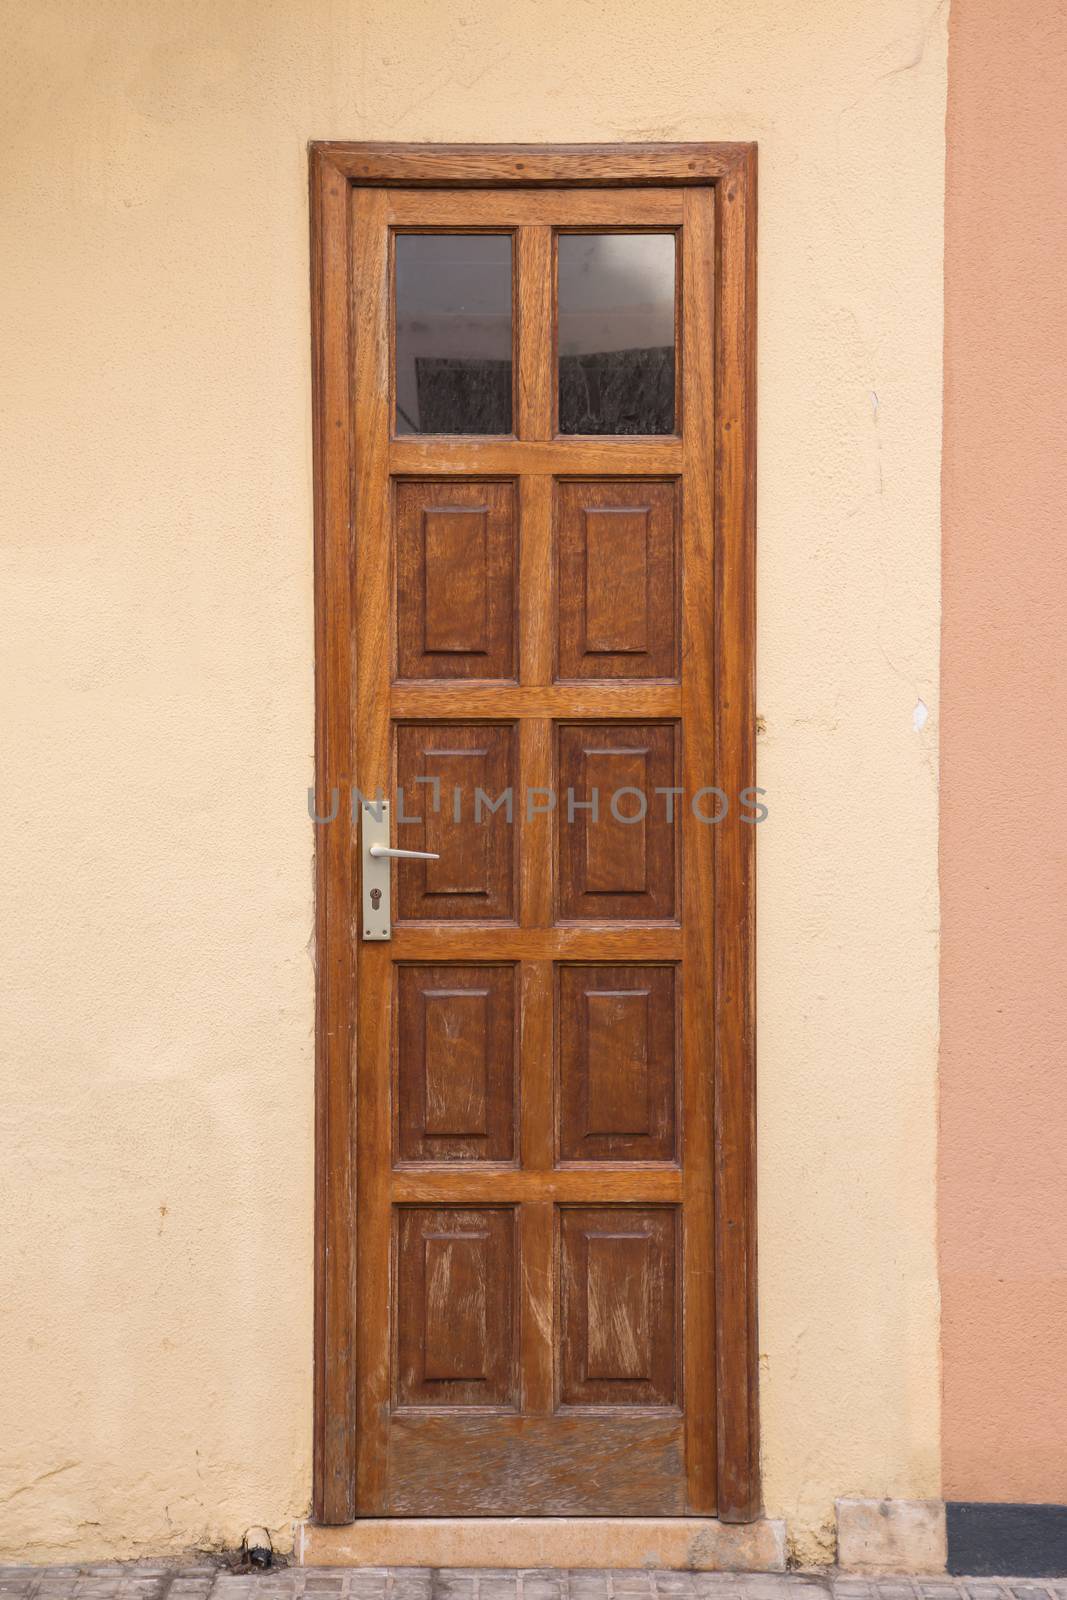 A wooden door with small windows above